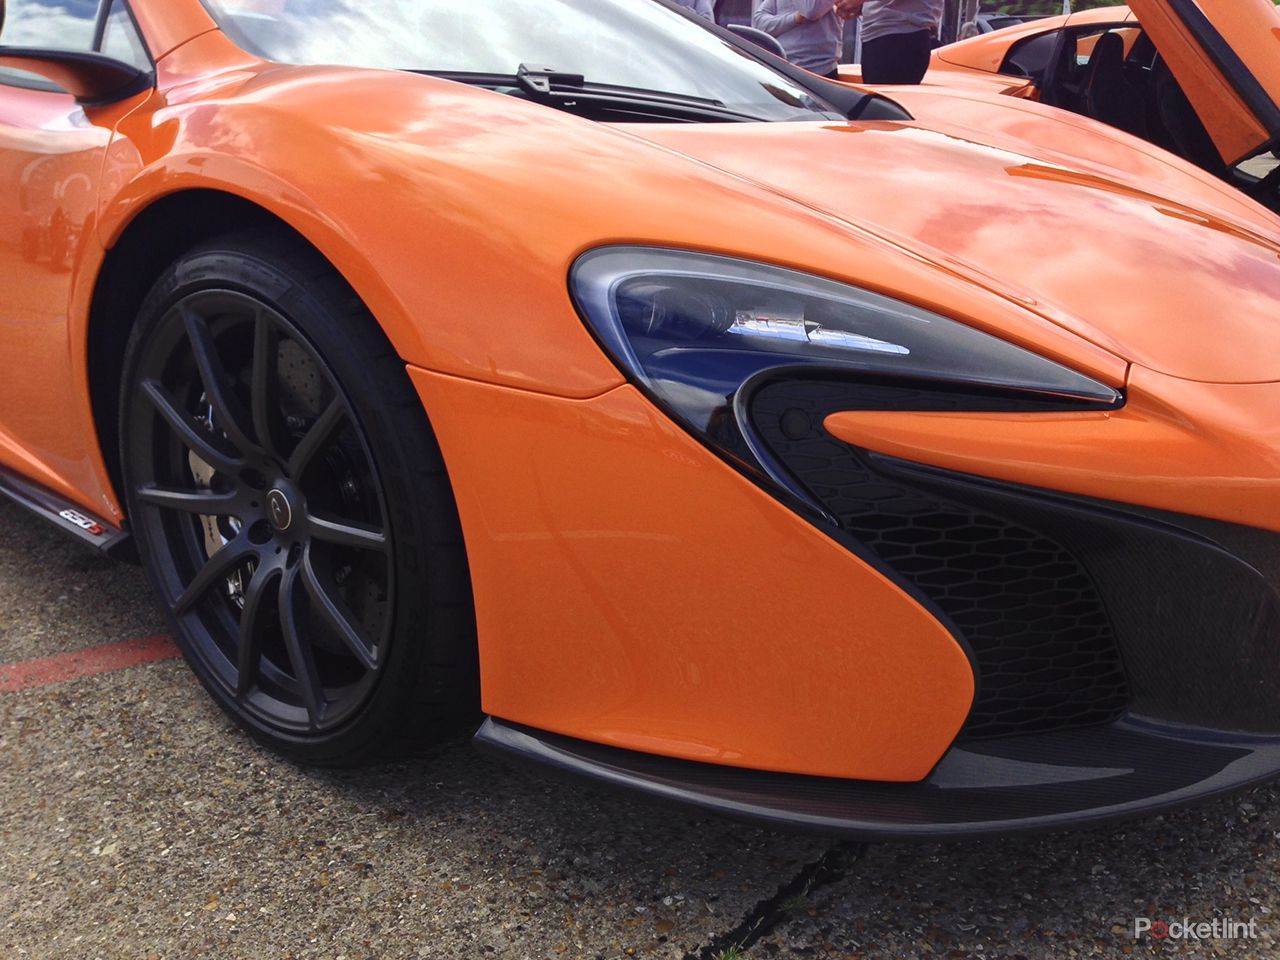 mclaren 650s first drive brit supercar contrasts comfort with savage performance image 16